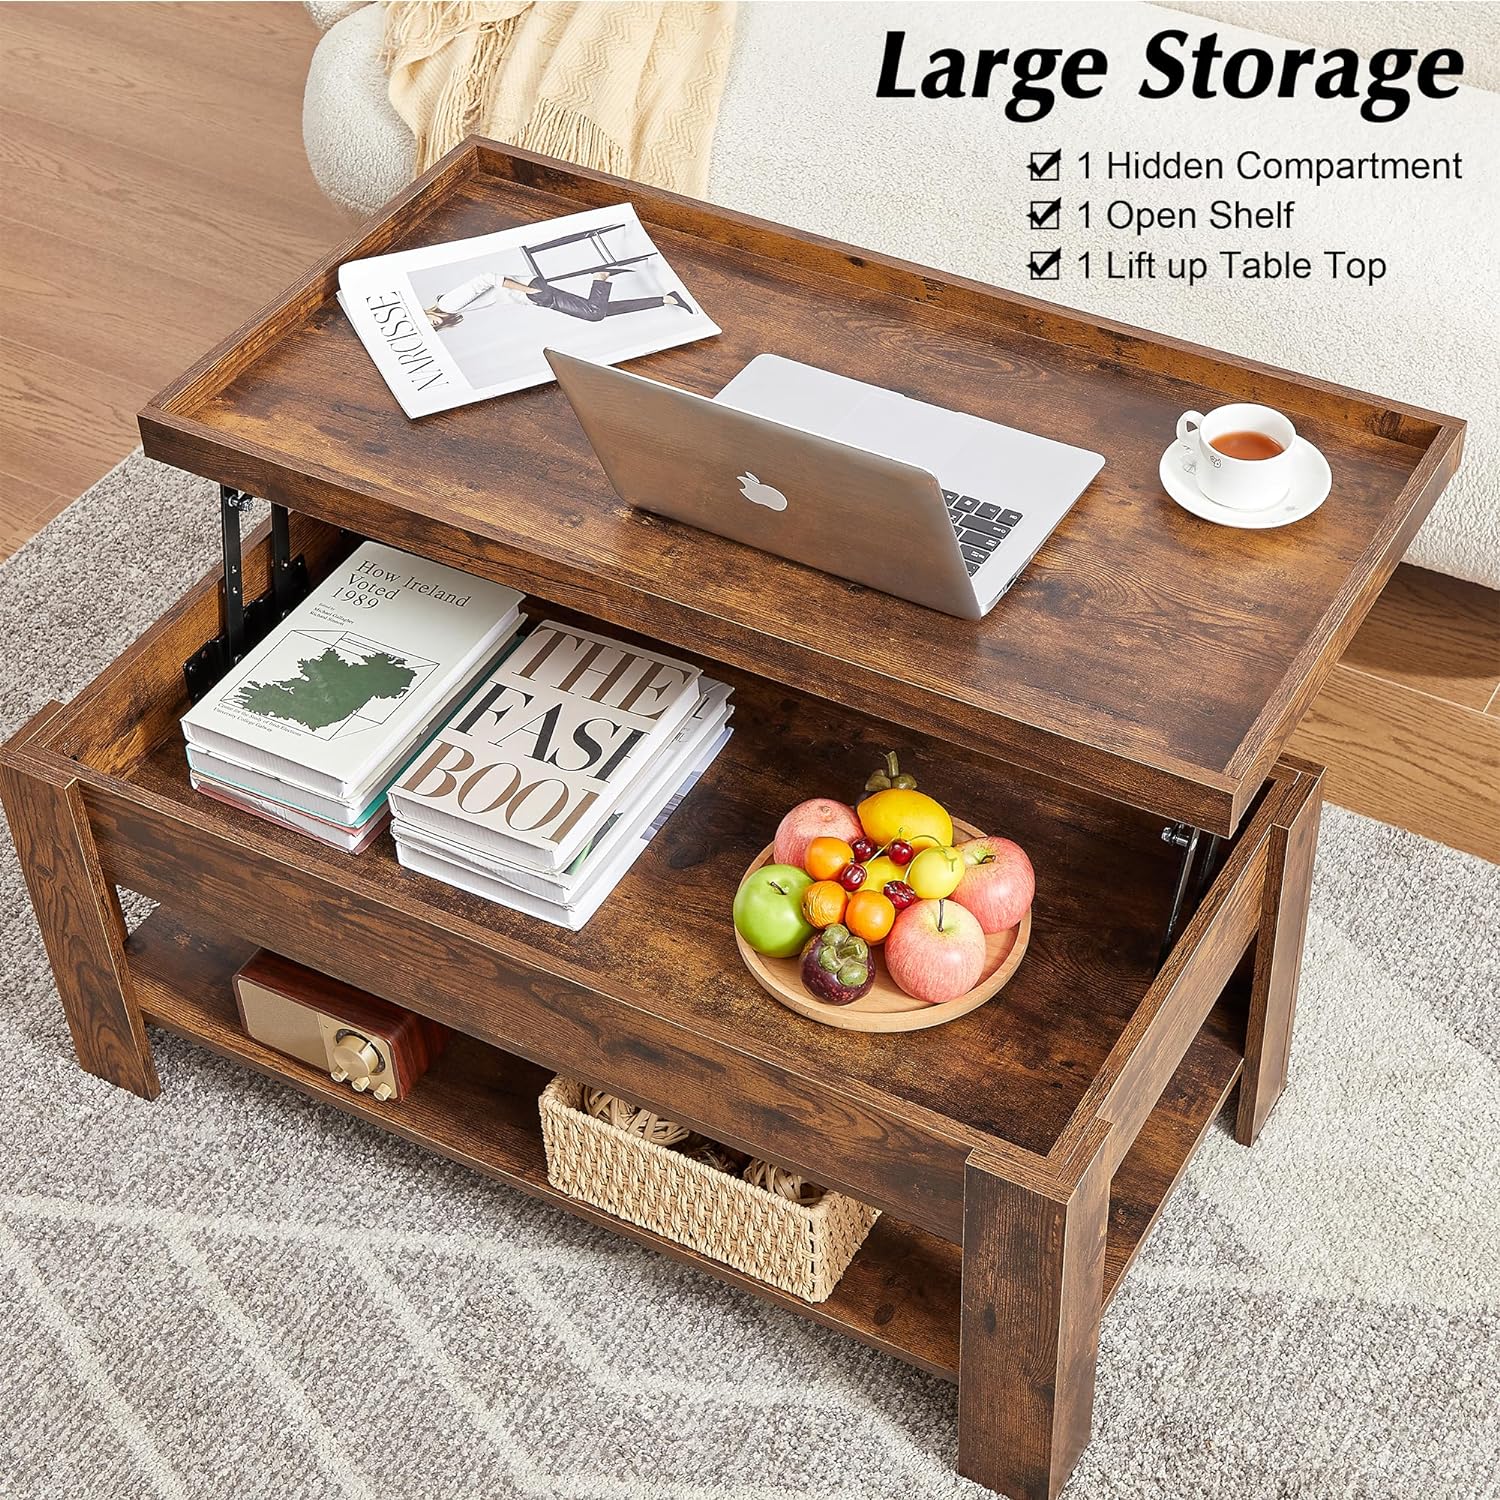 VECELO Lift Top Coffee Table with Storage Shelf